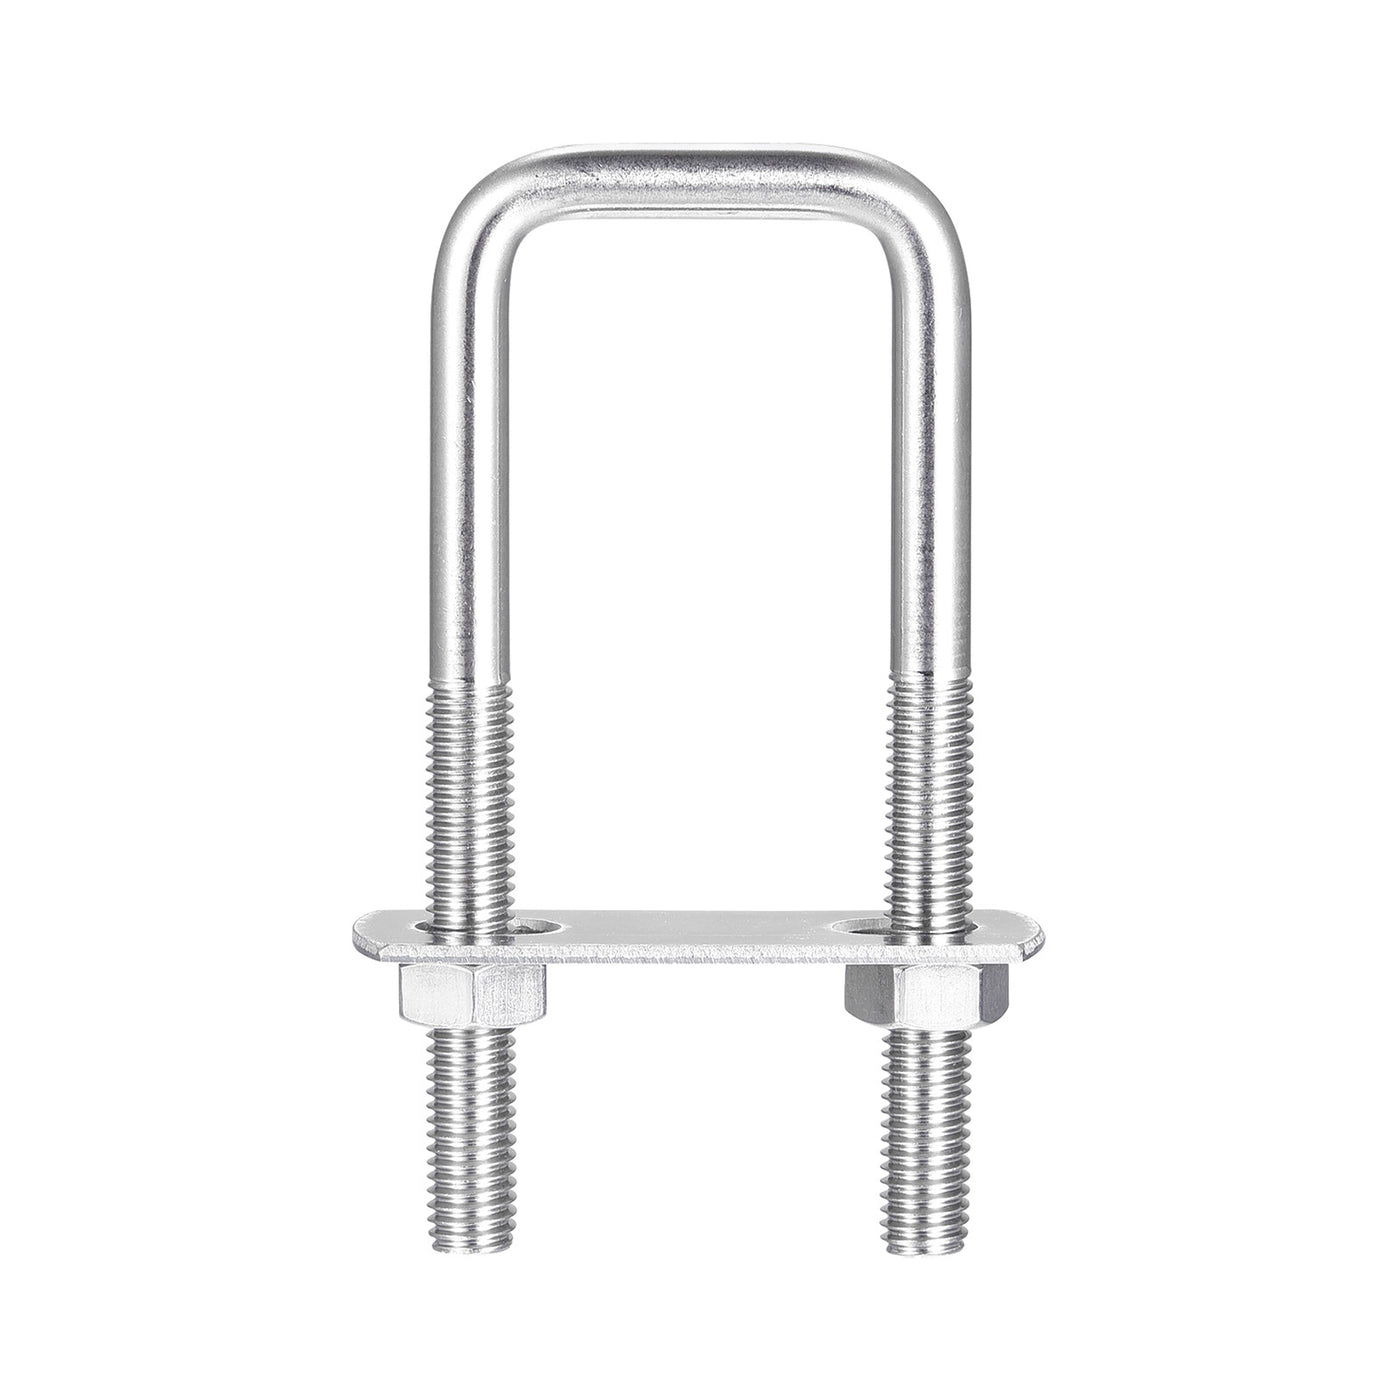 uxcell Uxcell Square U-Bolts, 2 Sets 32mm Inner Width 100mm Length M8 with Nuts and Plates